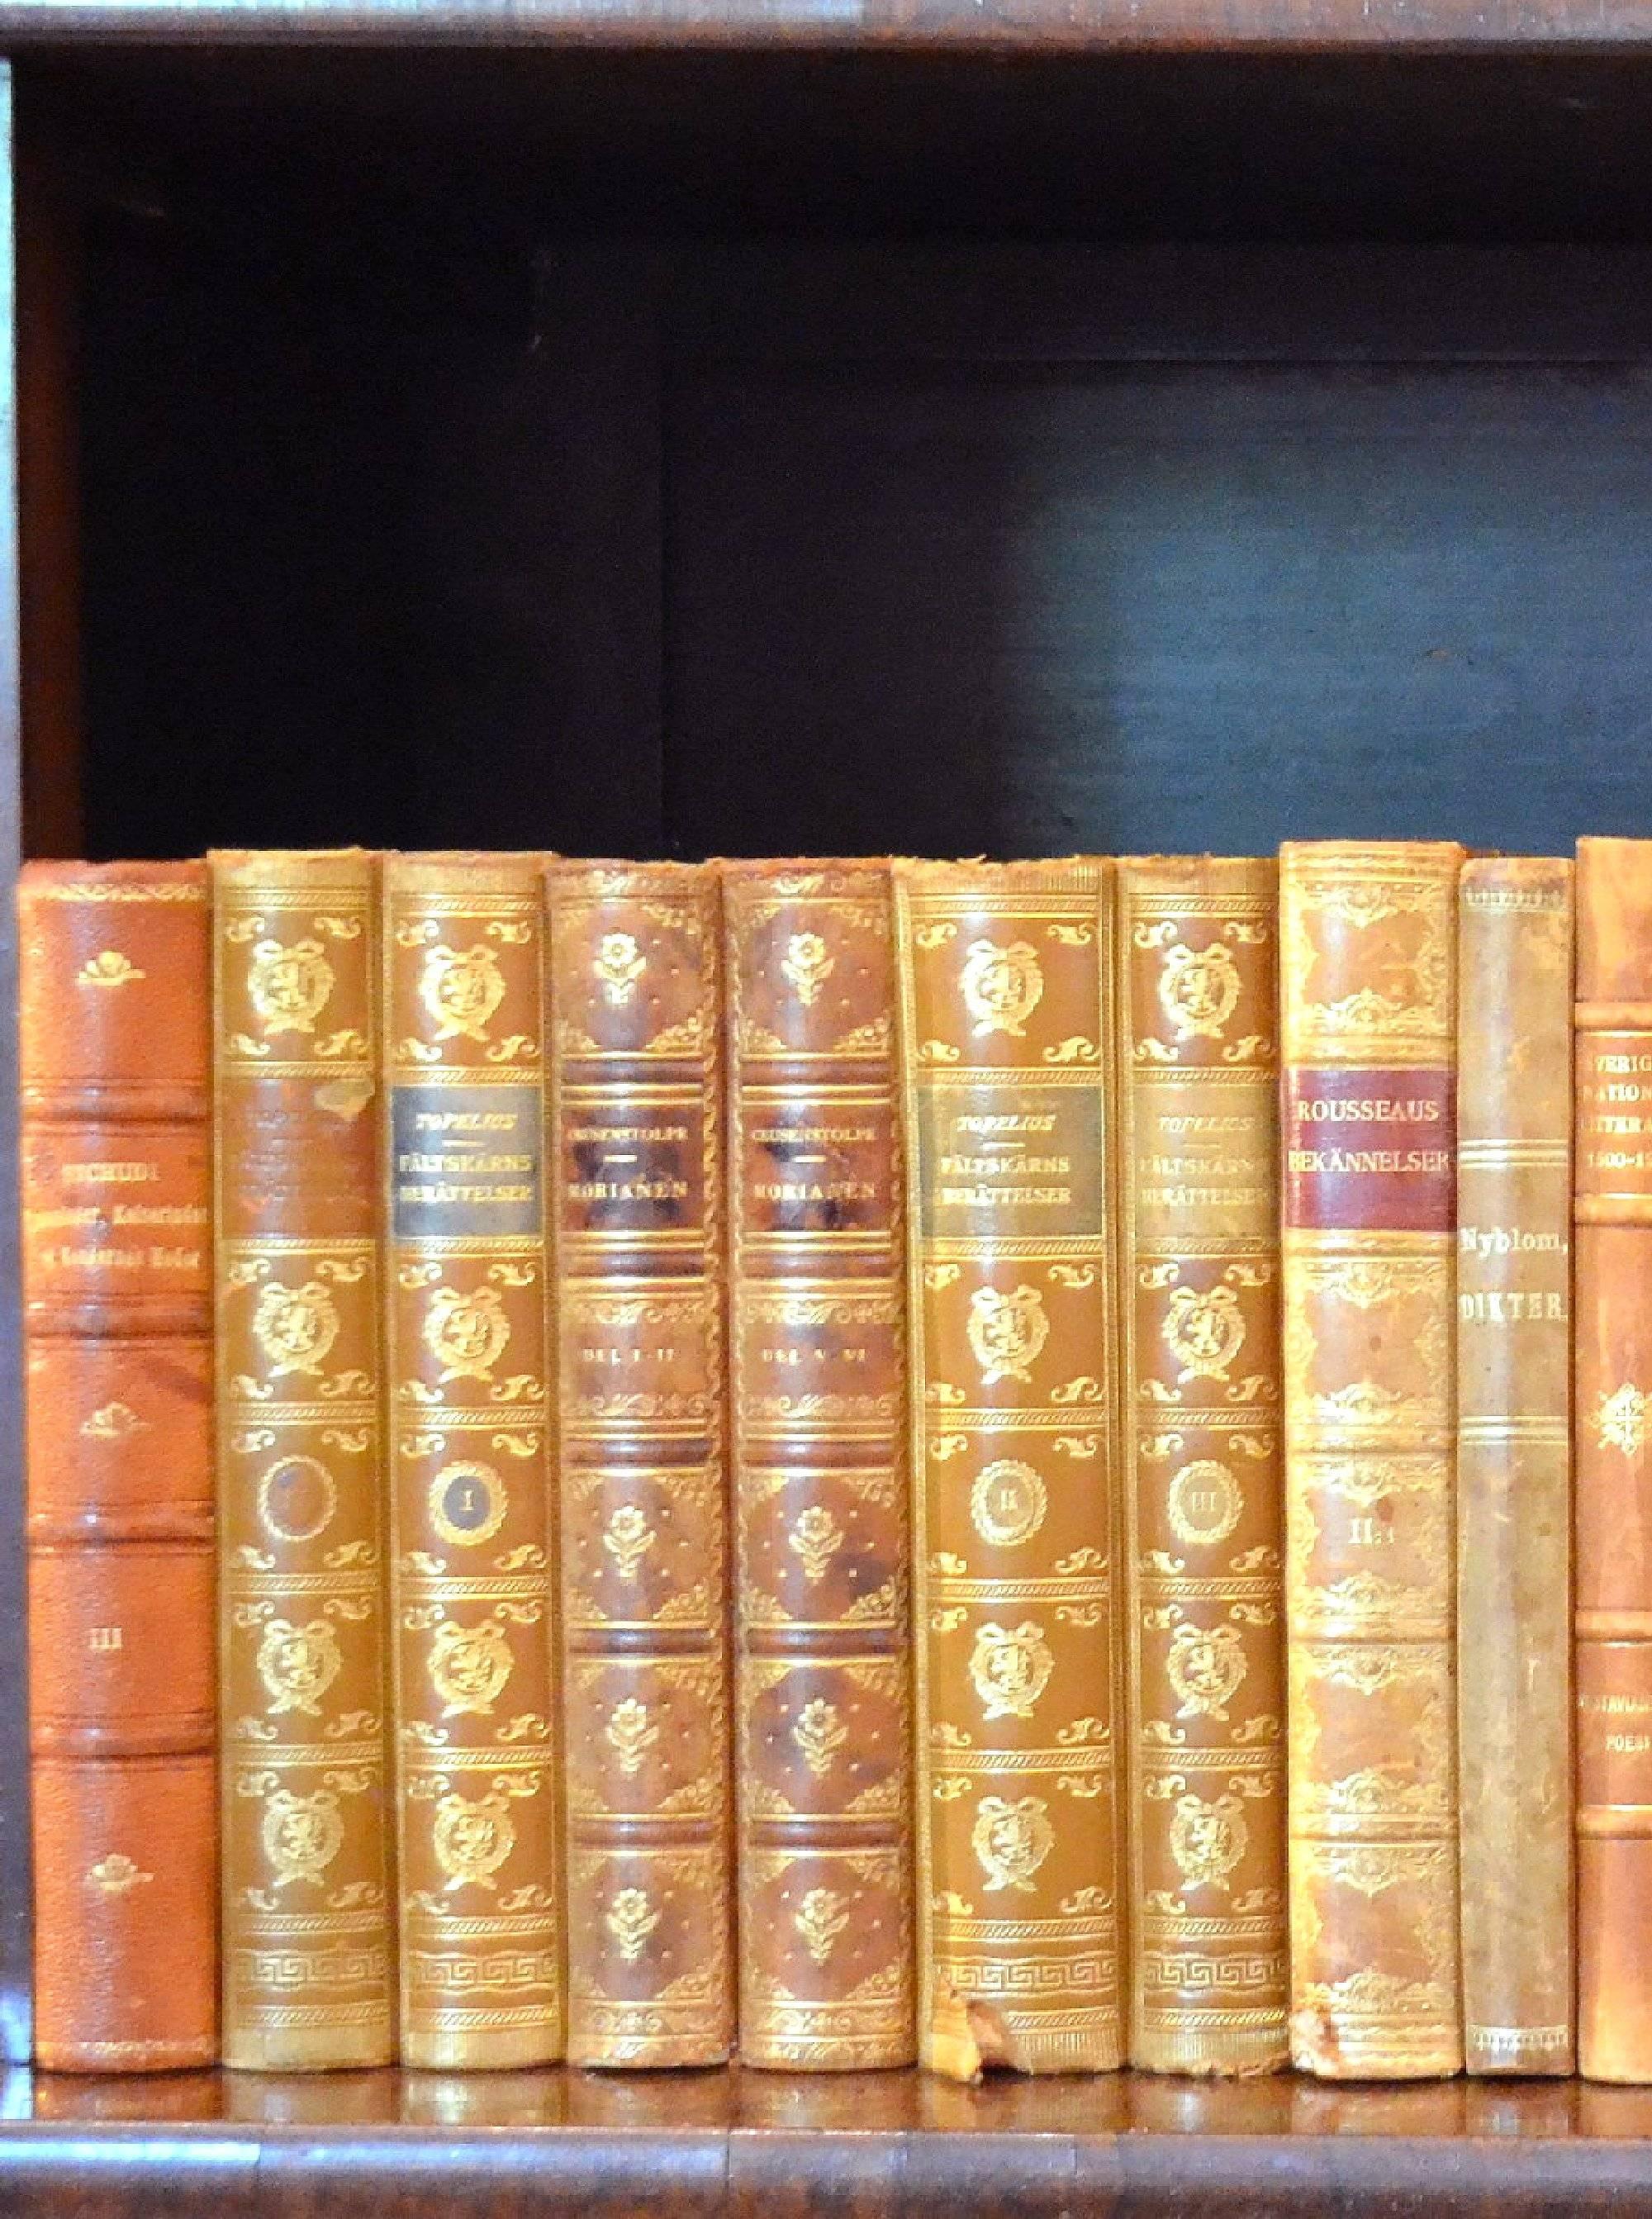 This meter of leather-bound books contains 35 books, in warm rich tones of light brown, tan, yellow gold and orange gold with gold leaf embossing. These books are all in very good condition and would beautifully enhance any bookcase or library. The